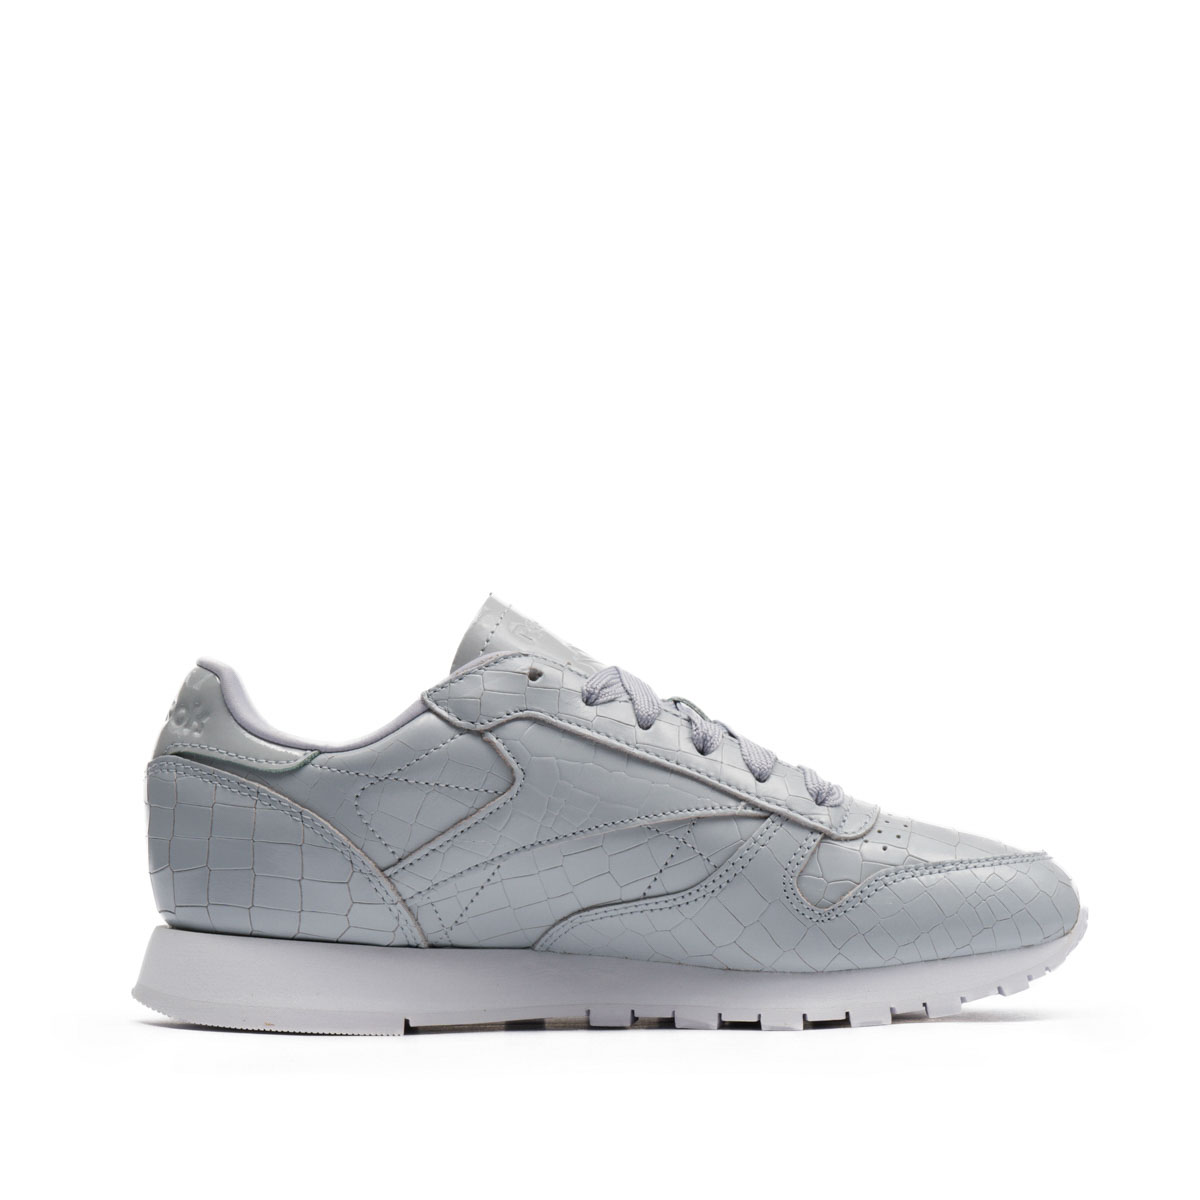 Reebok CL Leather Crackle  BS9869